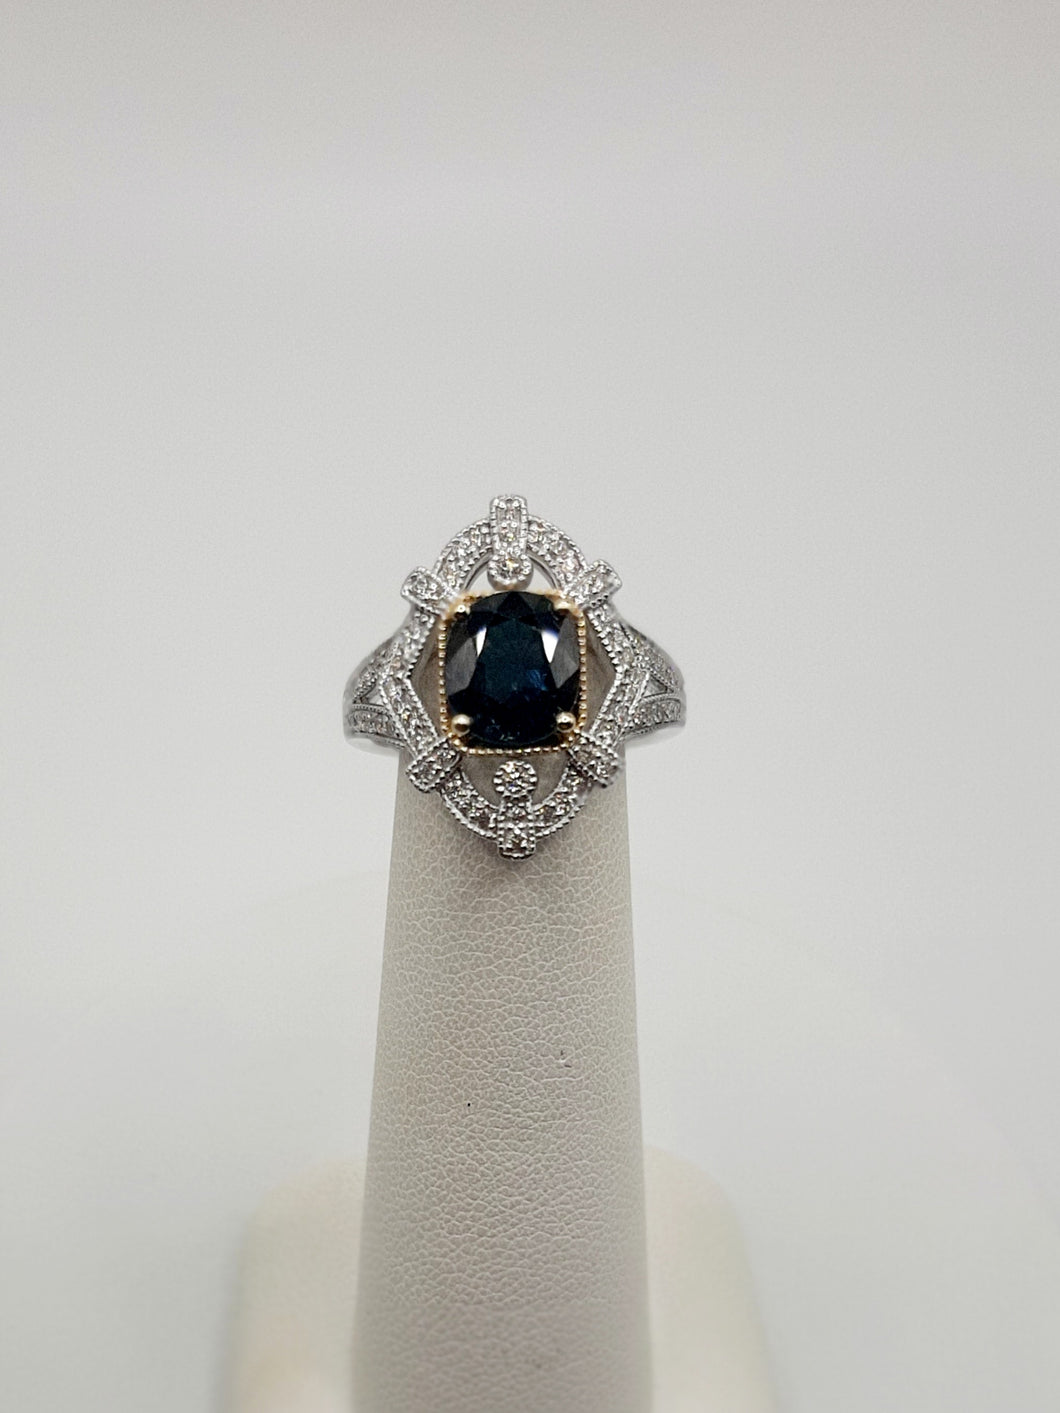 14Kt White and Yellow Gold Vintage Vibe Ring Featuring a 2.04 Carat Oval Blue Sapphire and .37 Carats of Diamonds